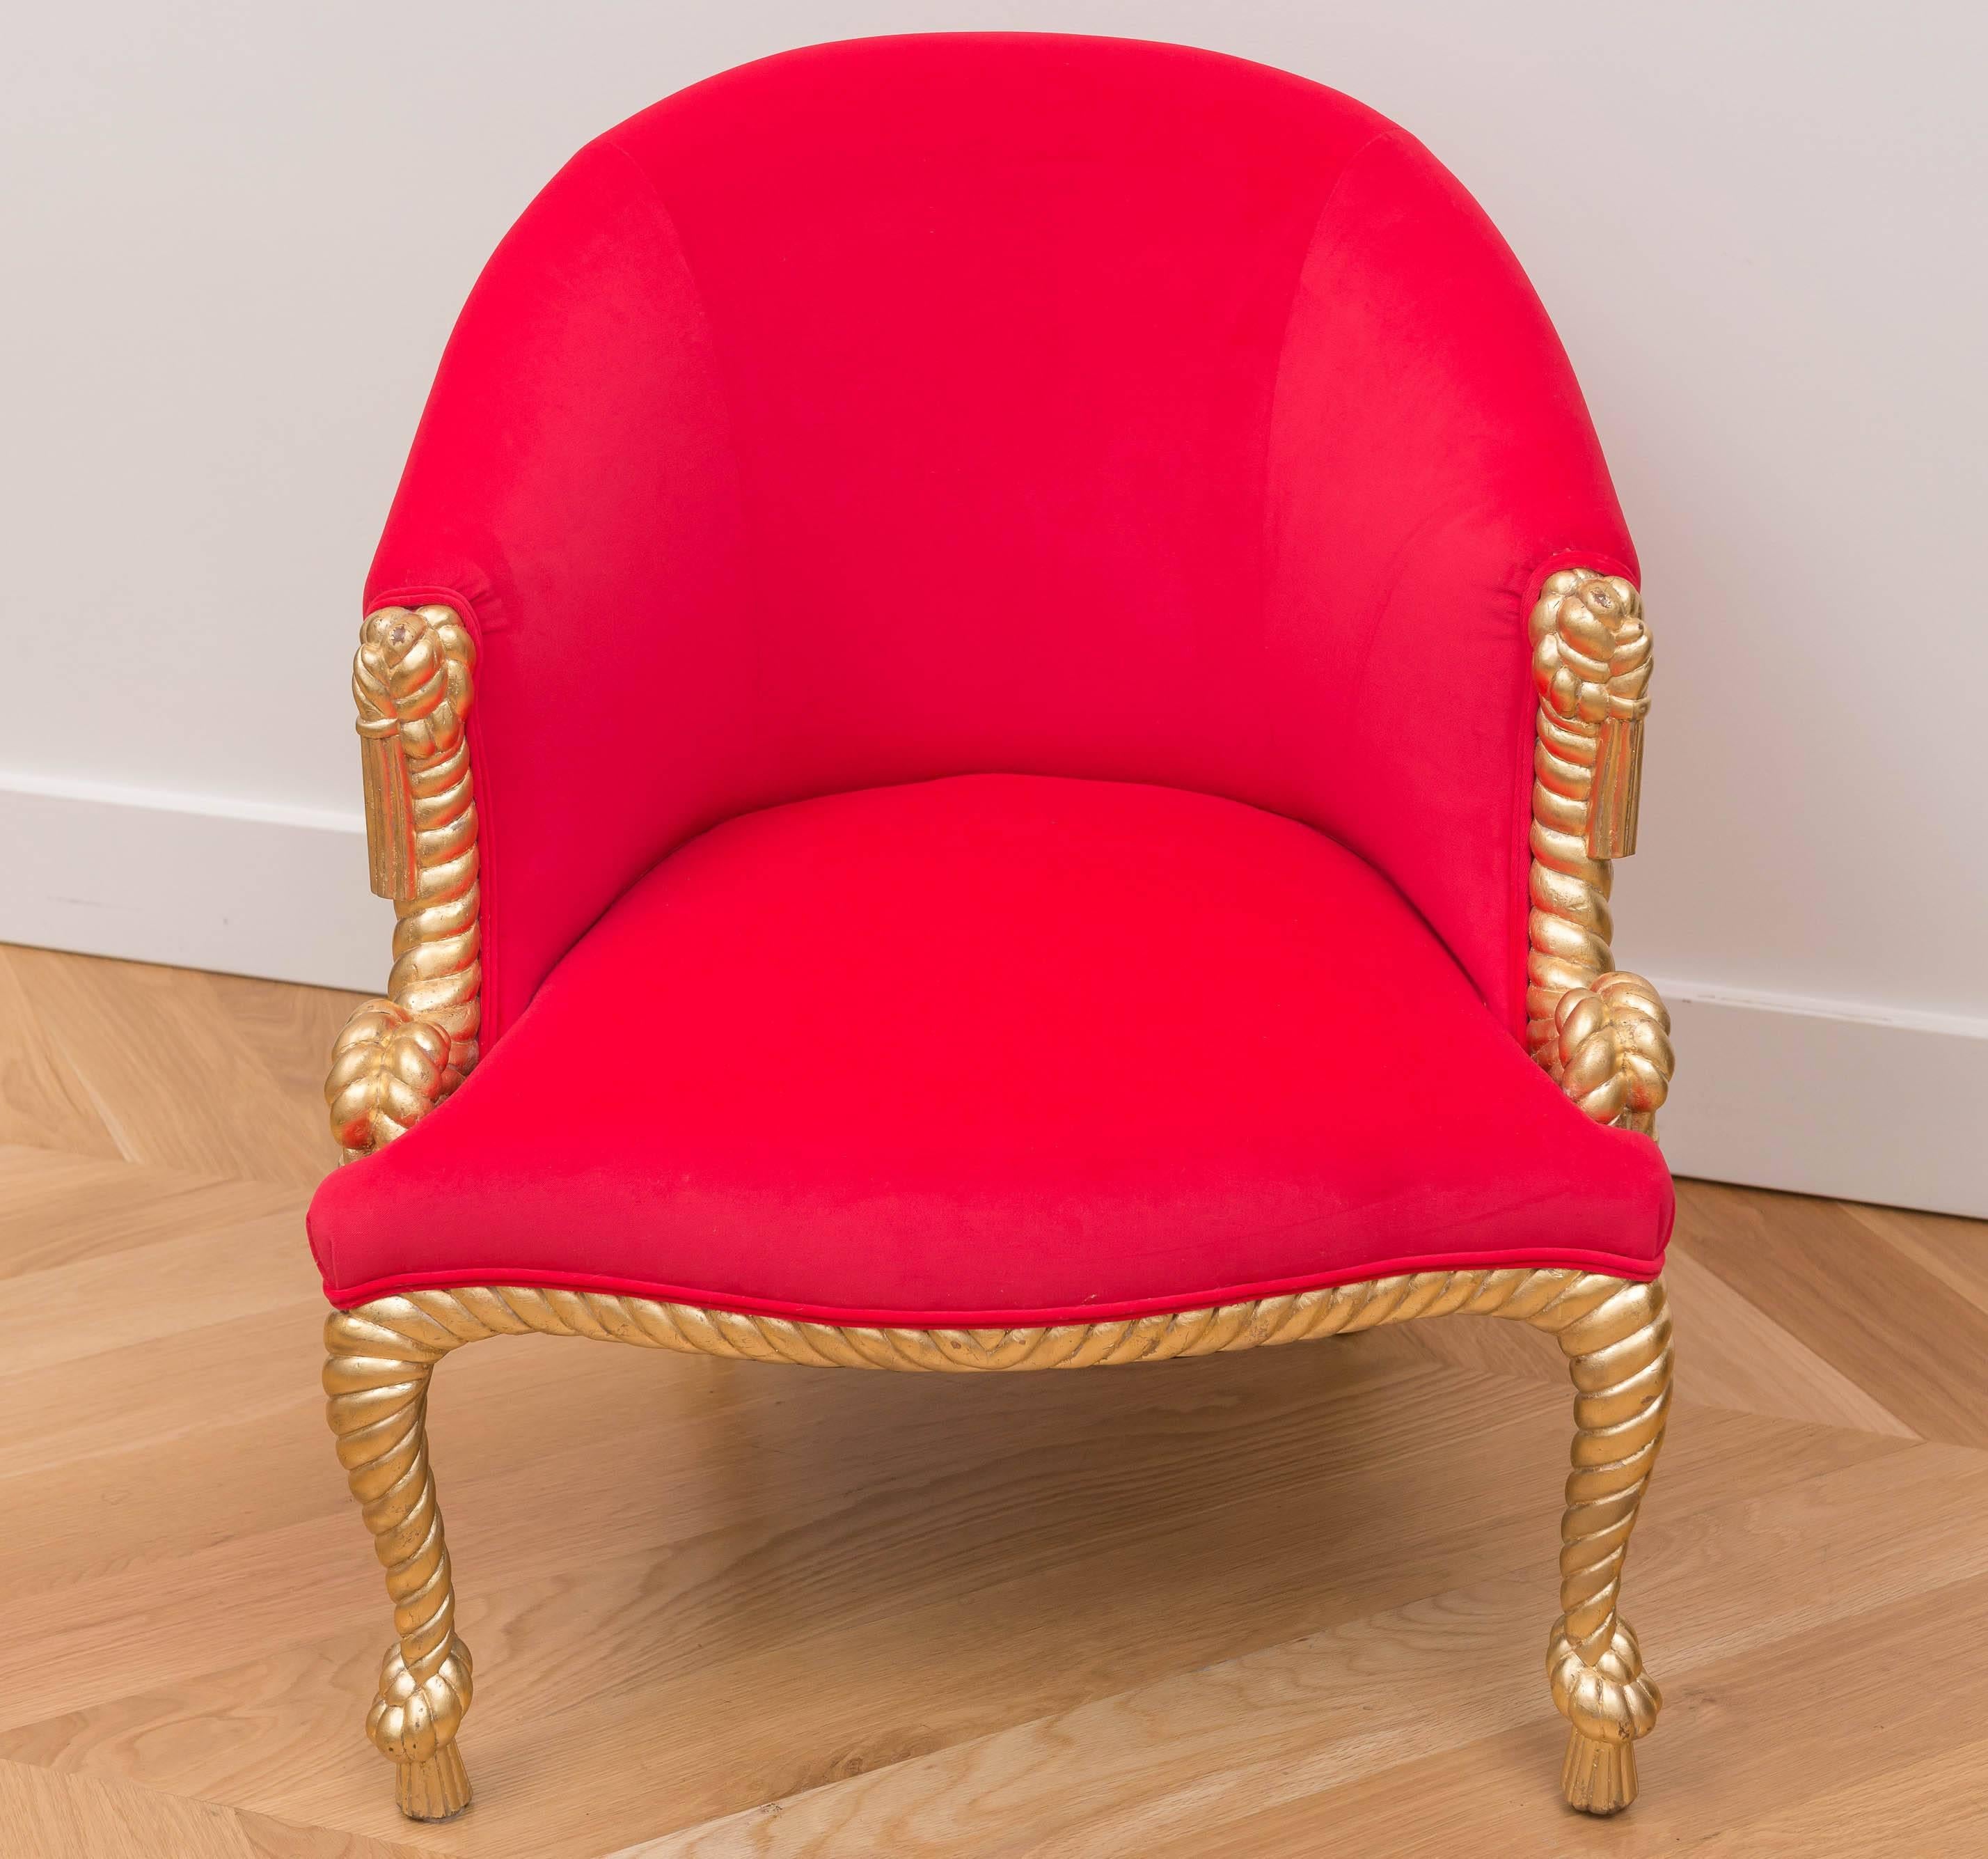 Gold gilt Italian tassel chair with new hot pink upholstery.